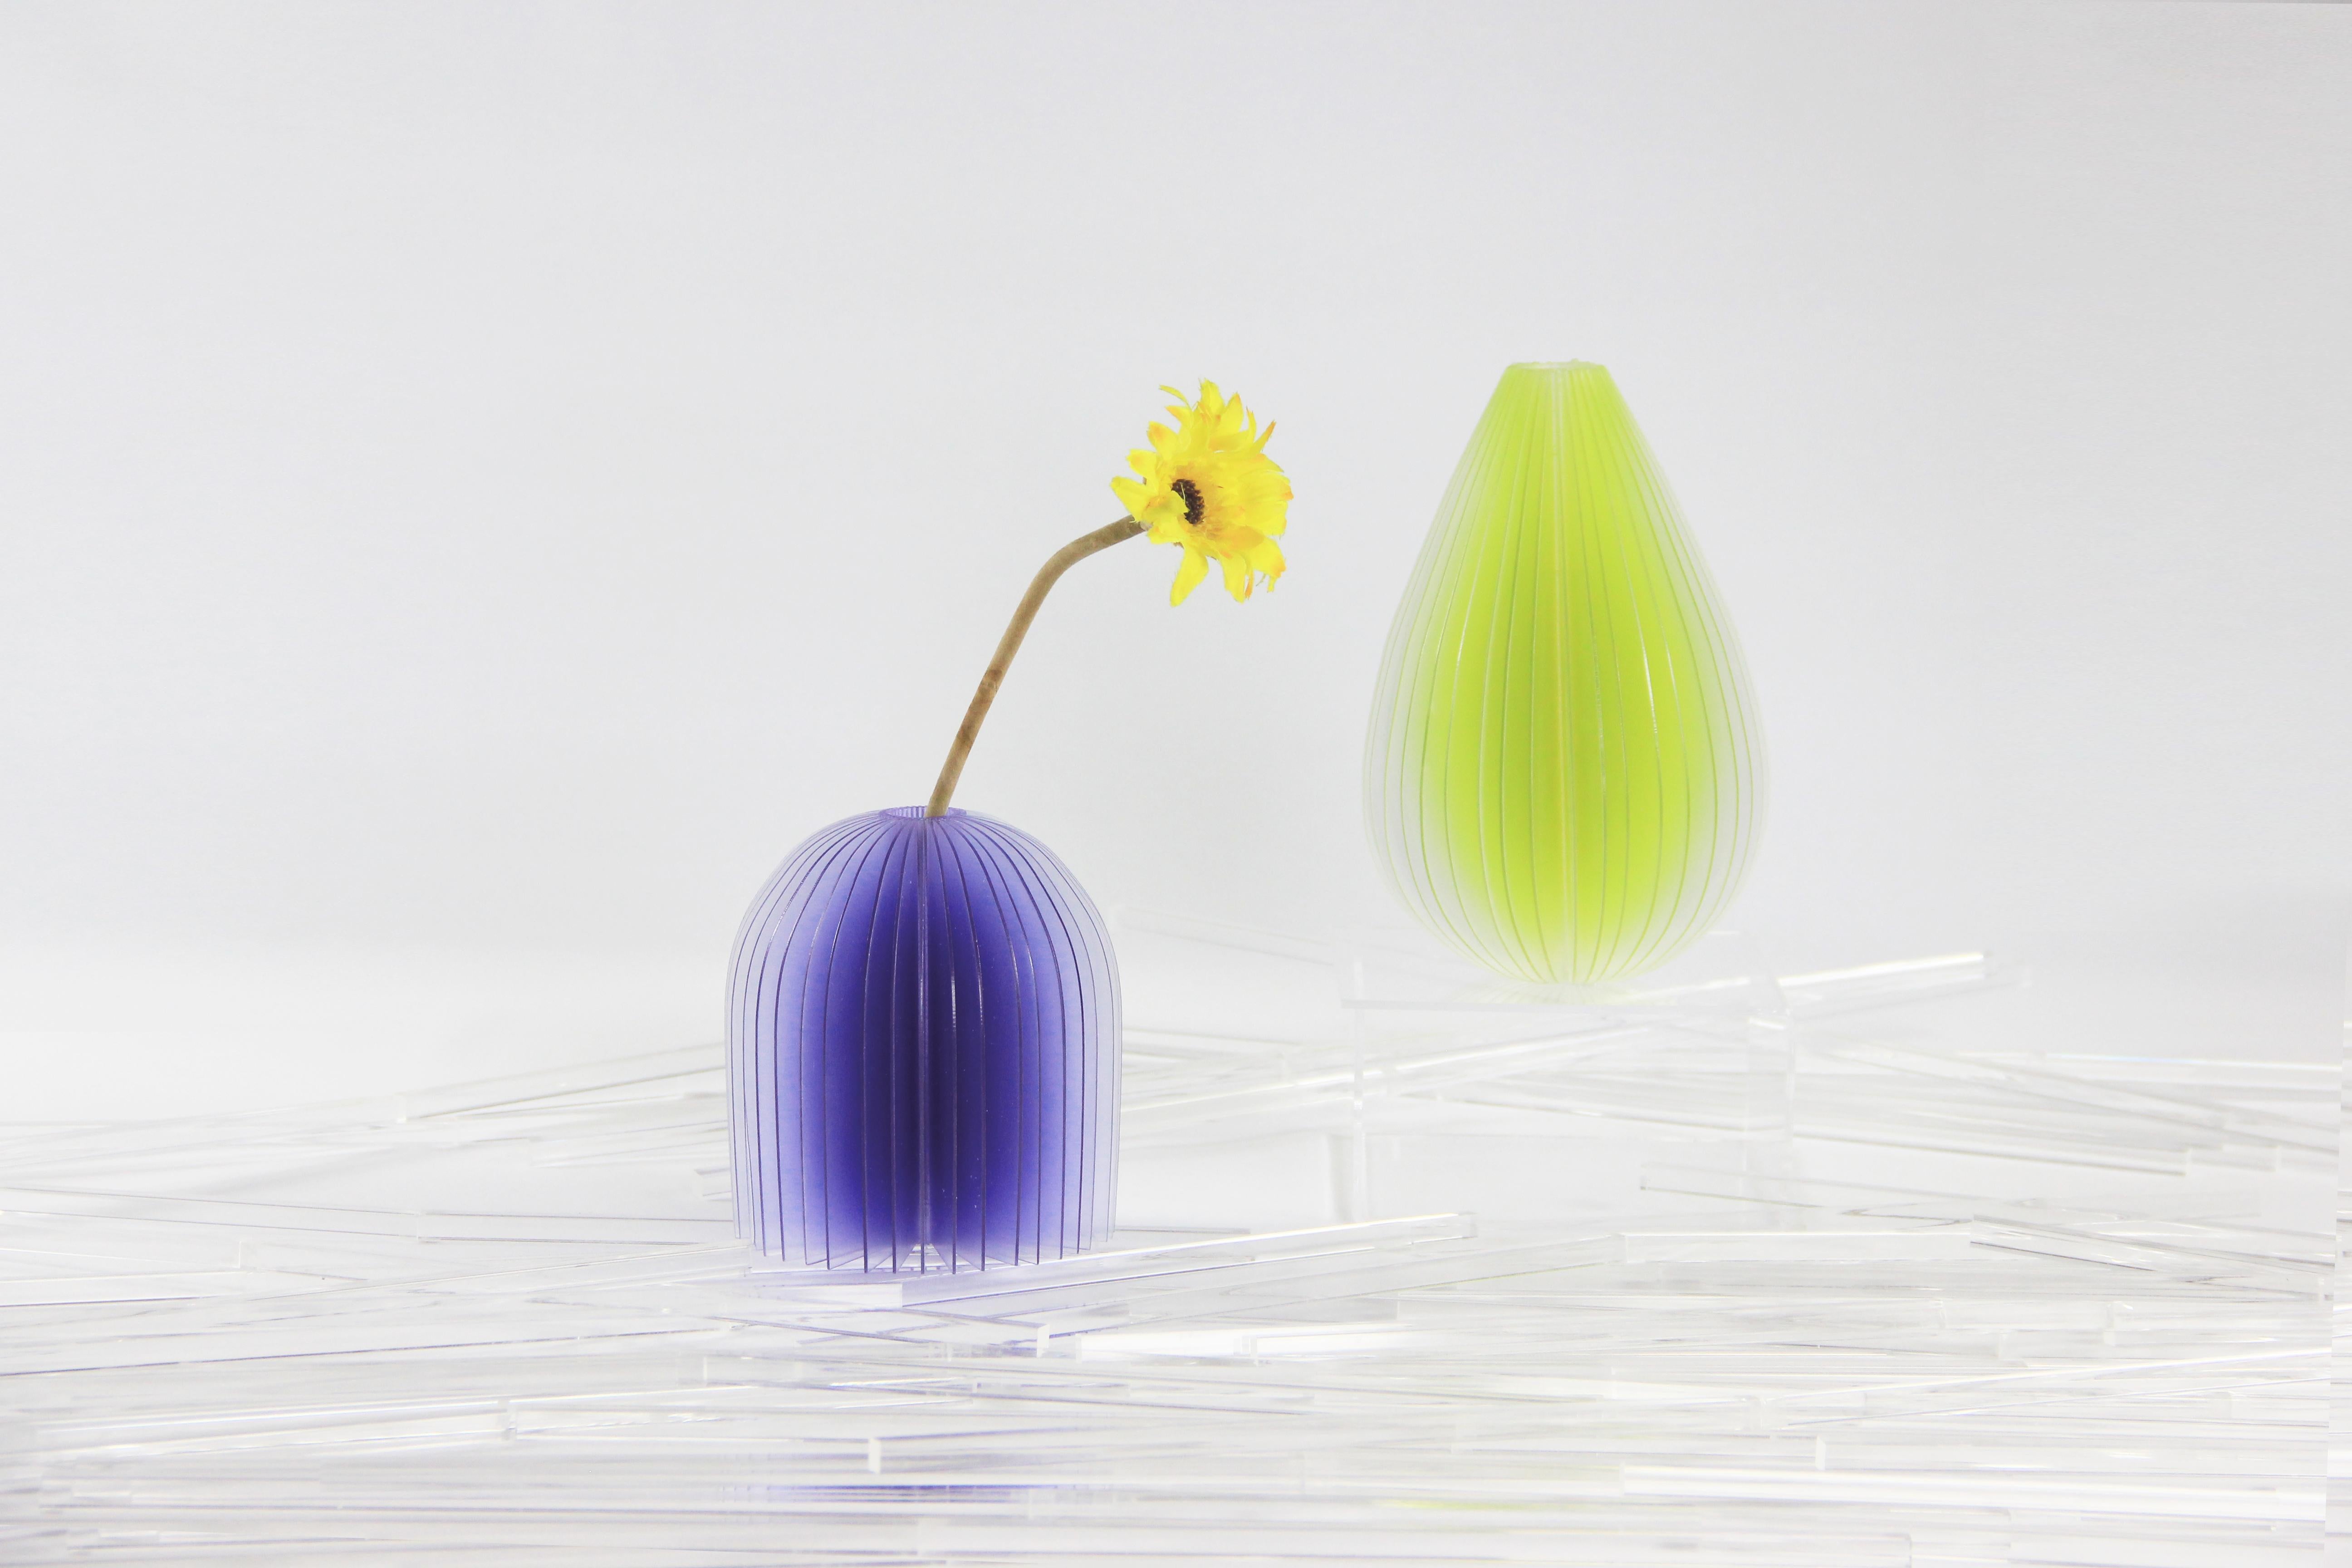 Lightness vases are inspired by an accidental scene. When light is projected into the space which is layered , the wonderful imagination is beginning. The vases feature gradations of colors that optically change depending on the light hitting